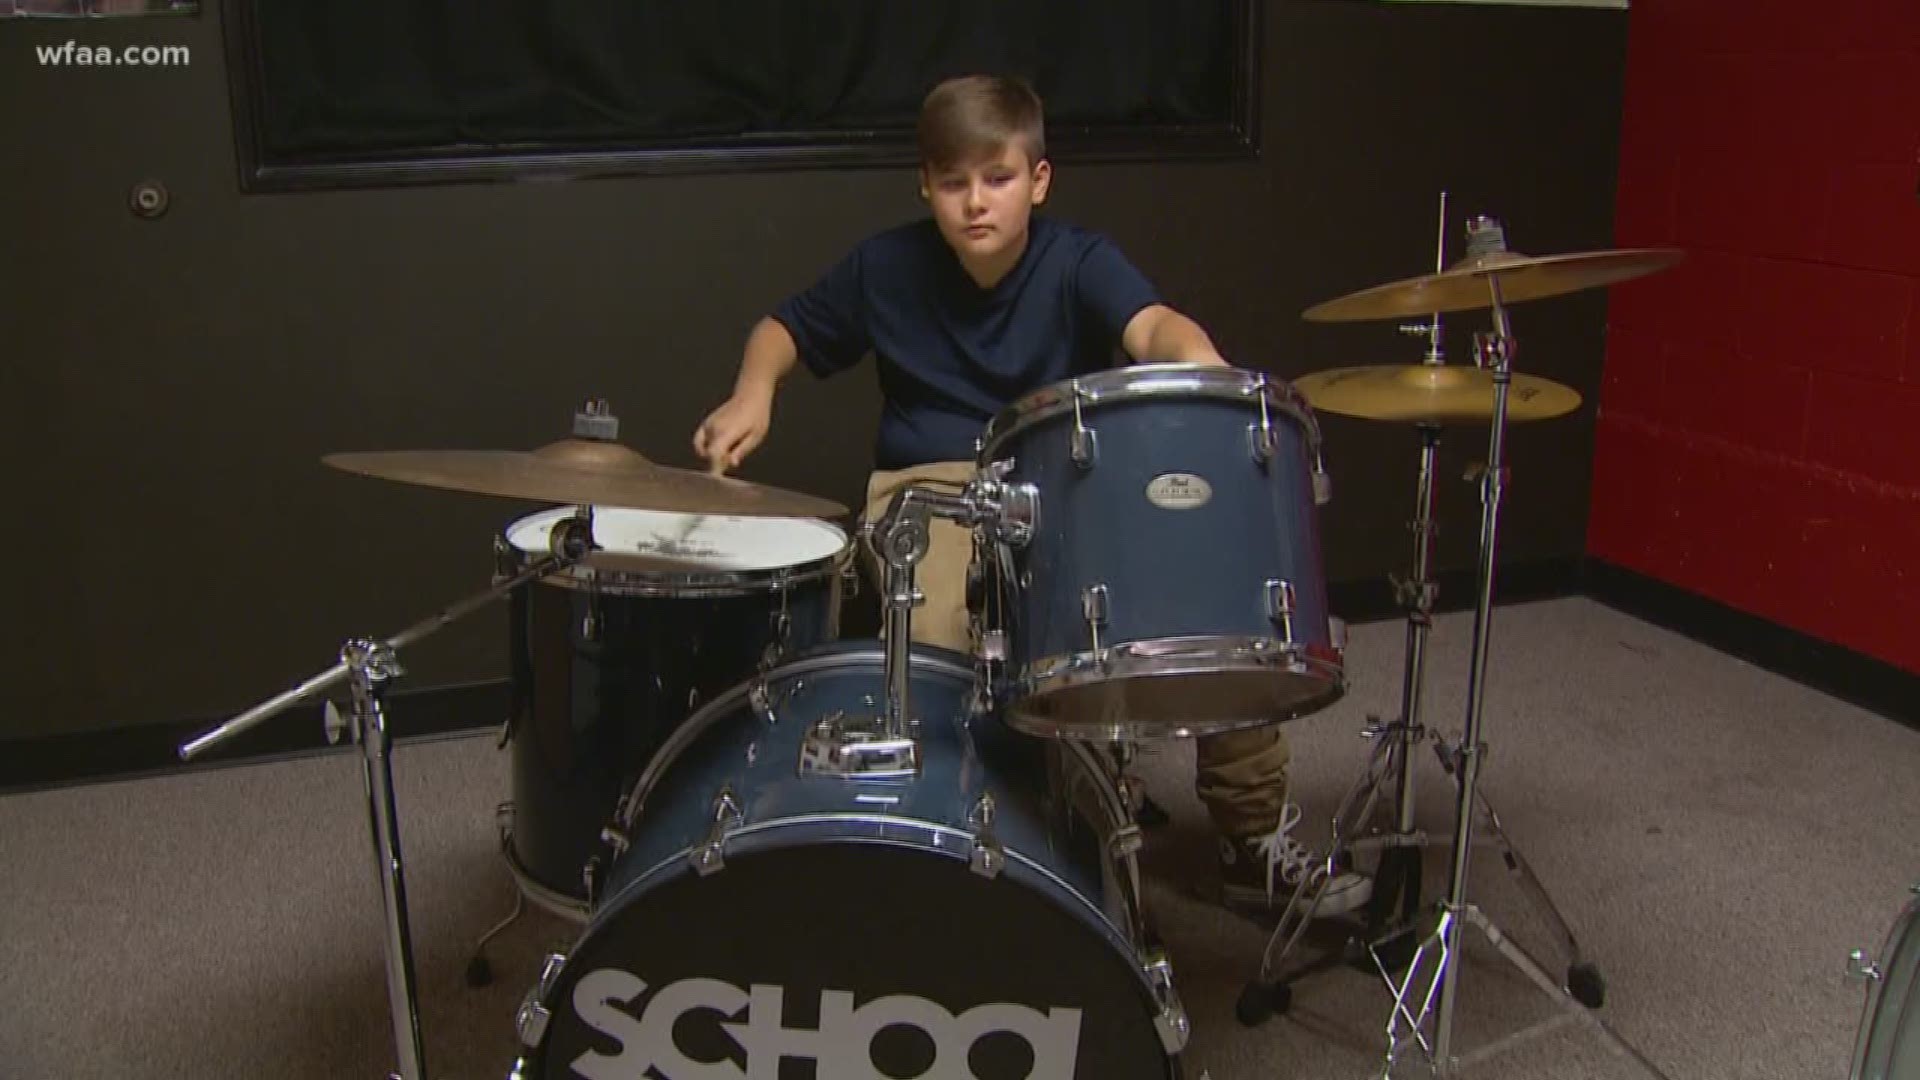 Elijah is 12 years old, has been in foster care for five years and has lived at several different homes. He says he’s found a break from worries and stress by playing the drums. But he says it would be music to his ears to be adopted. “What is good about me is I could be a very, very, very nice child. Like I could be so smart, so uniqued and so talented."